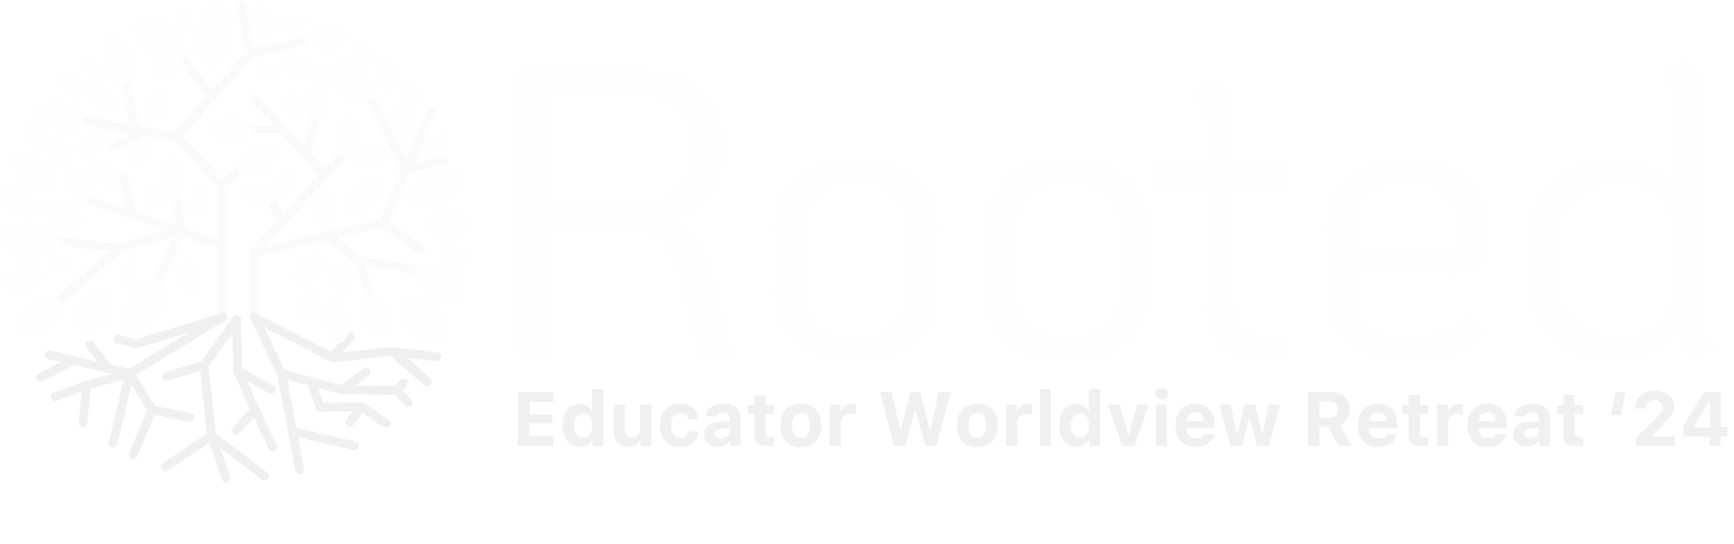 Rooted Educator Worldview Retreat 24